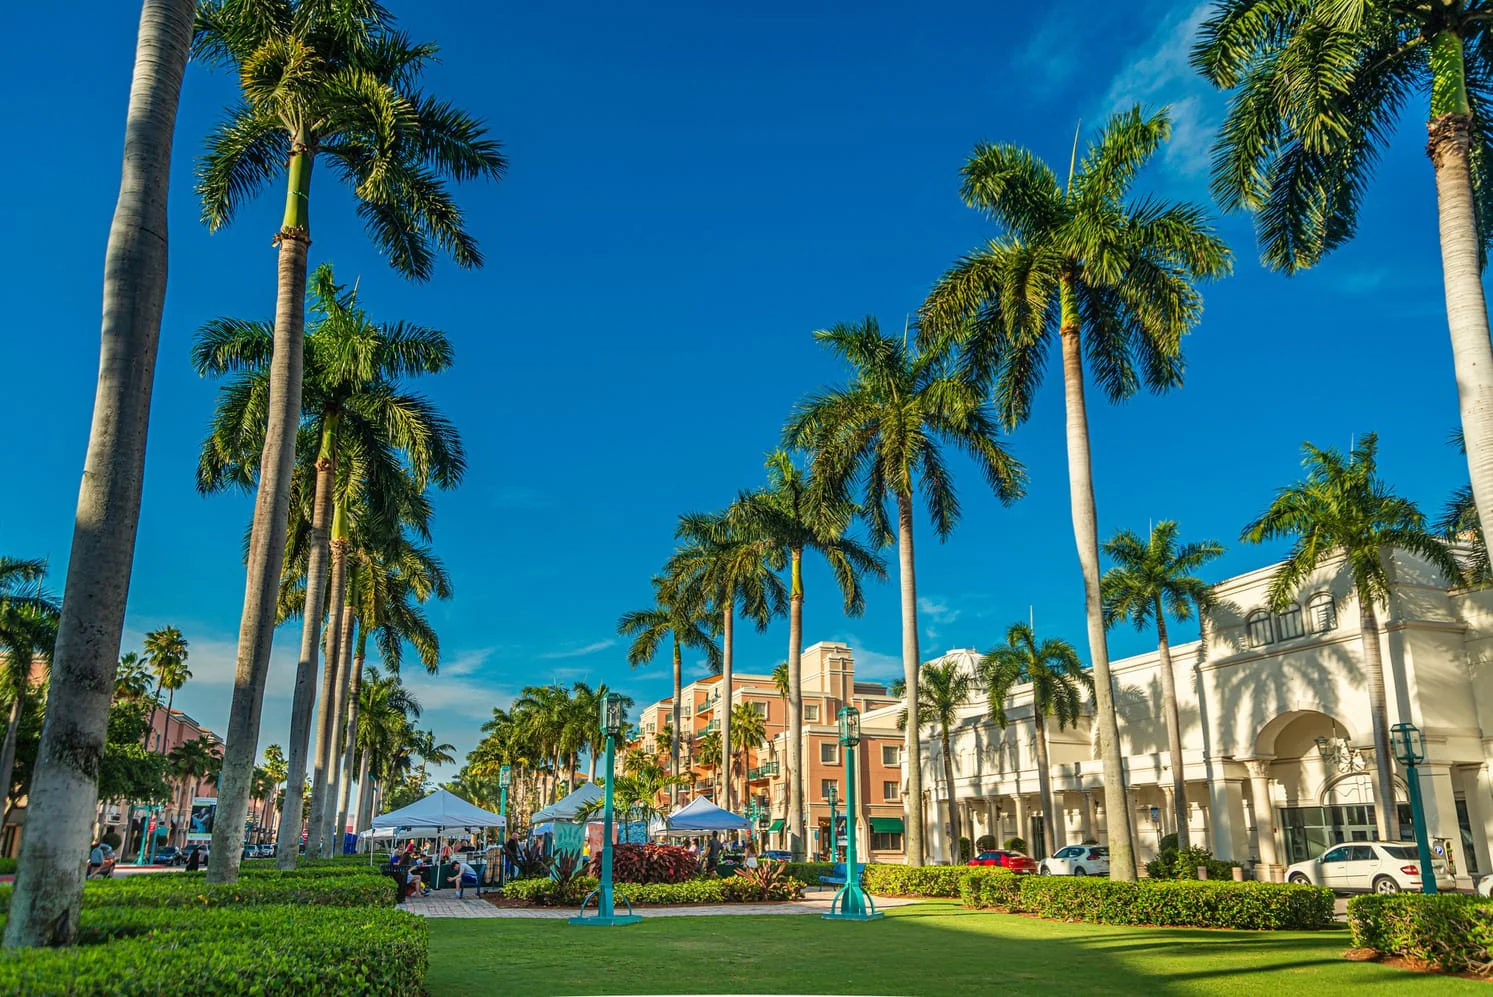 A scenic park with tall palm trees, people gathered under white tents, and pastel-colored buildings in the background under a clear blue sky.